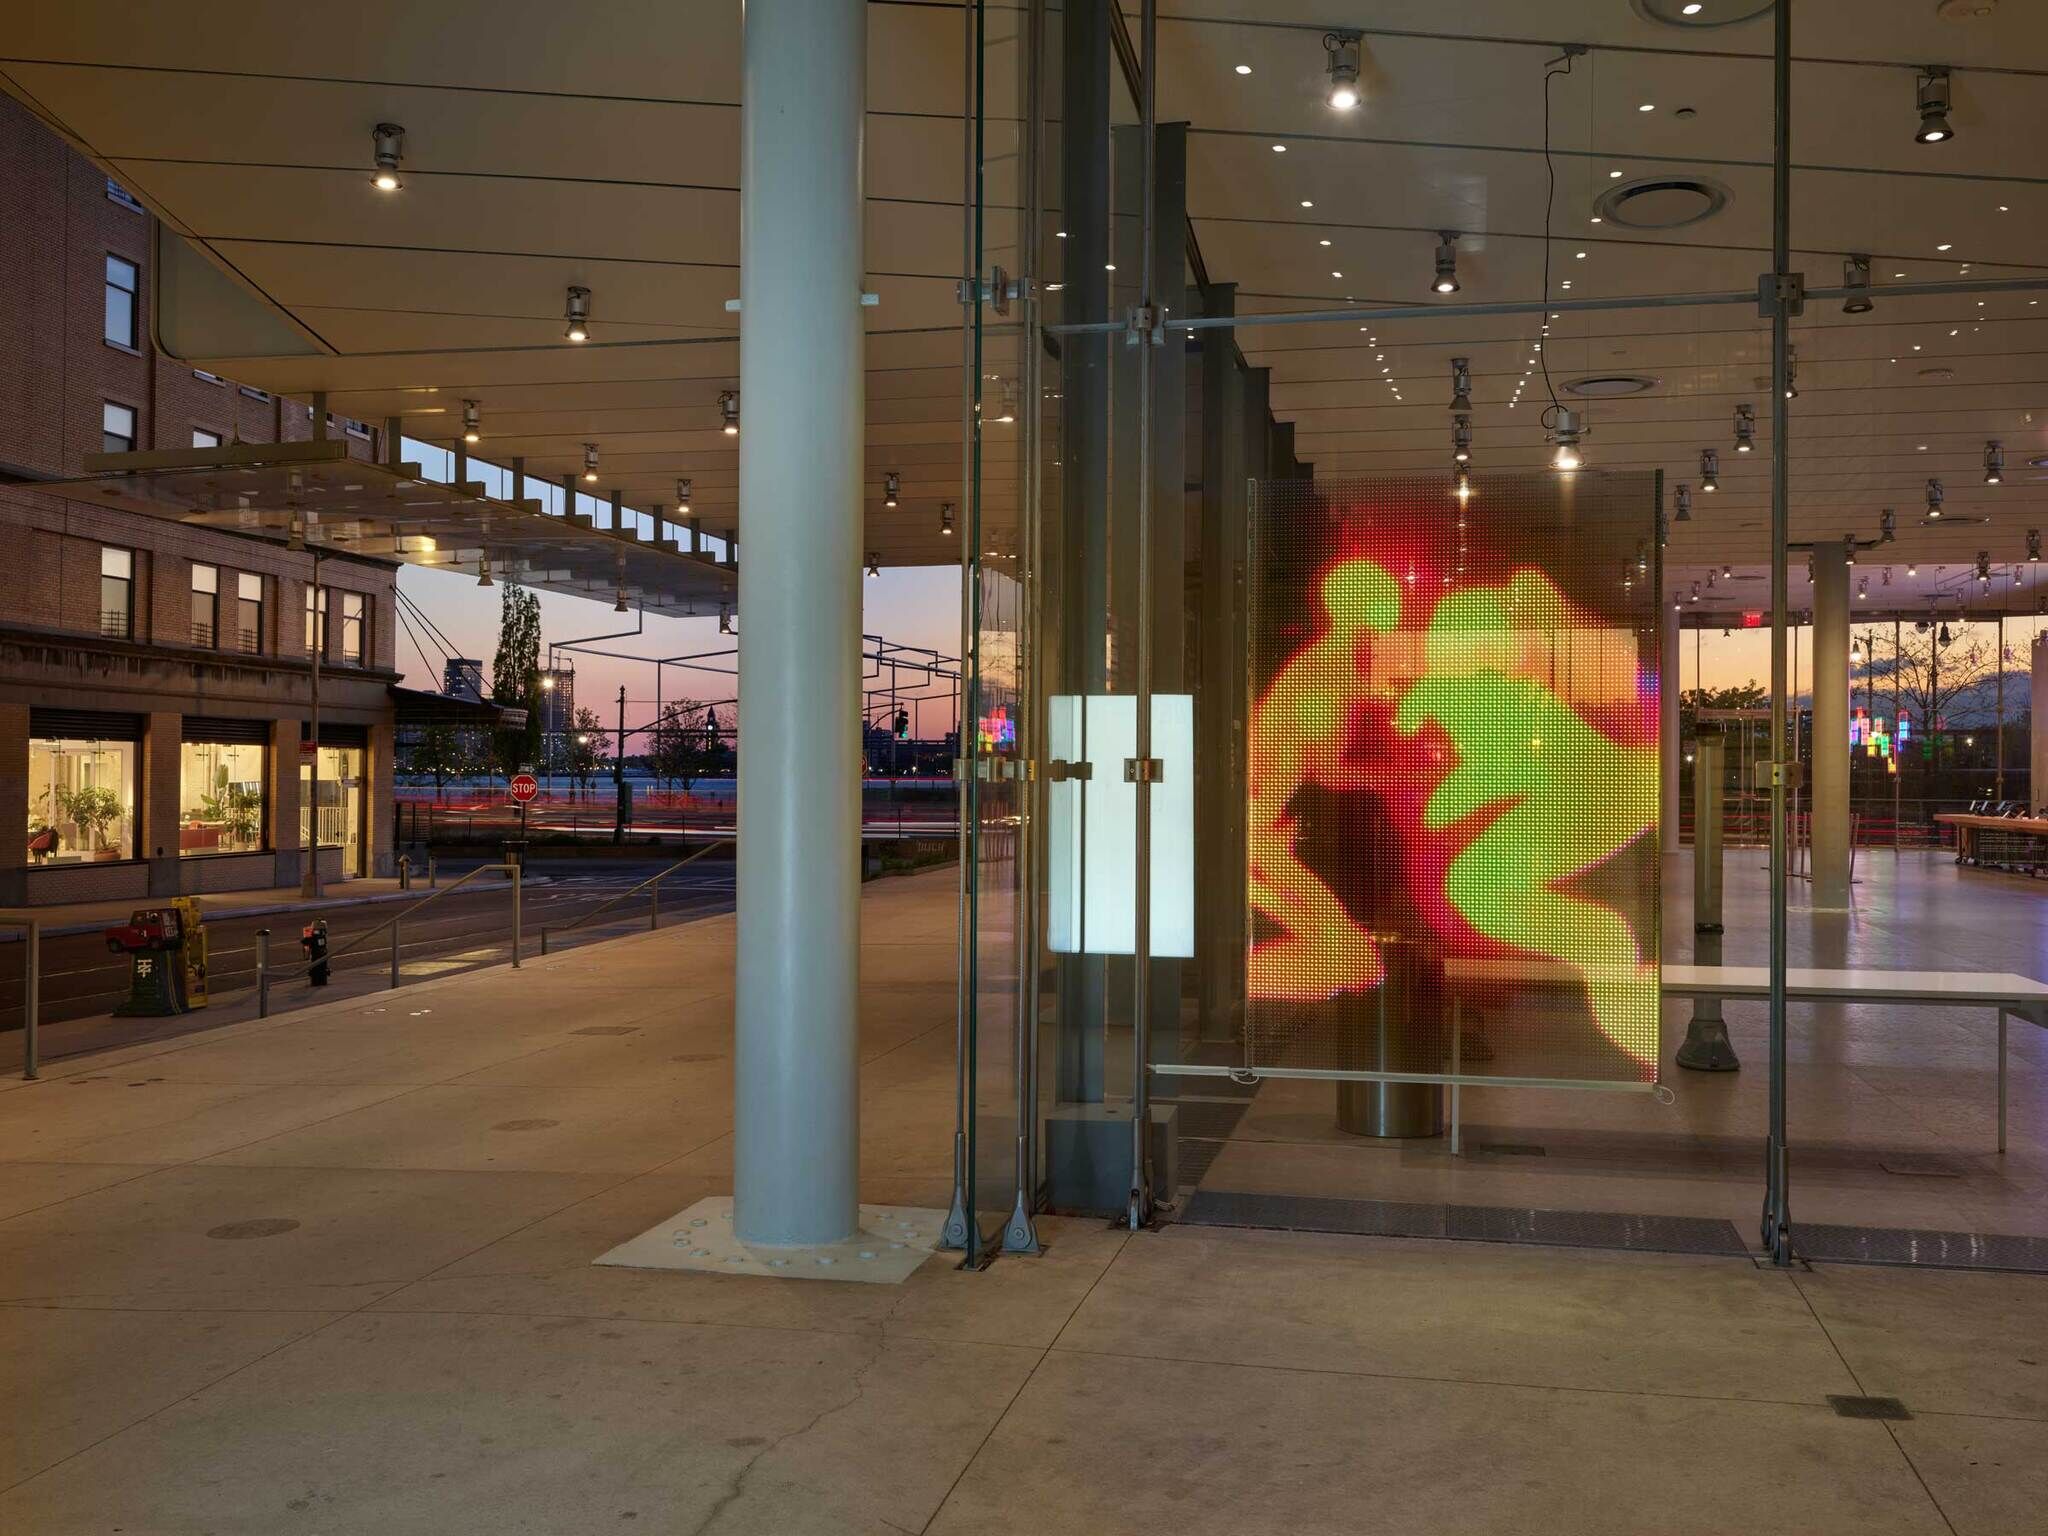 A projection of two red and yellow figures on the glass wall of the outside of the Whitney building.